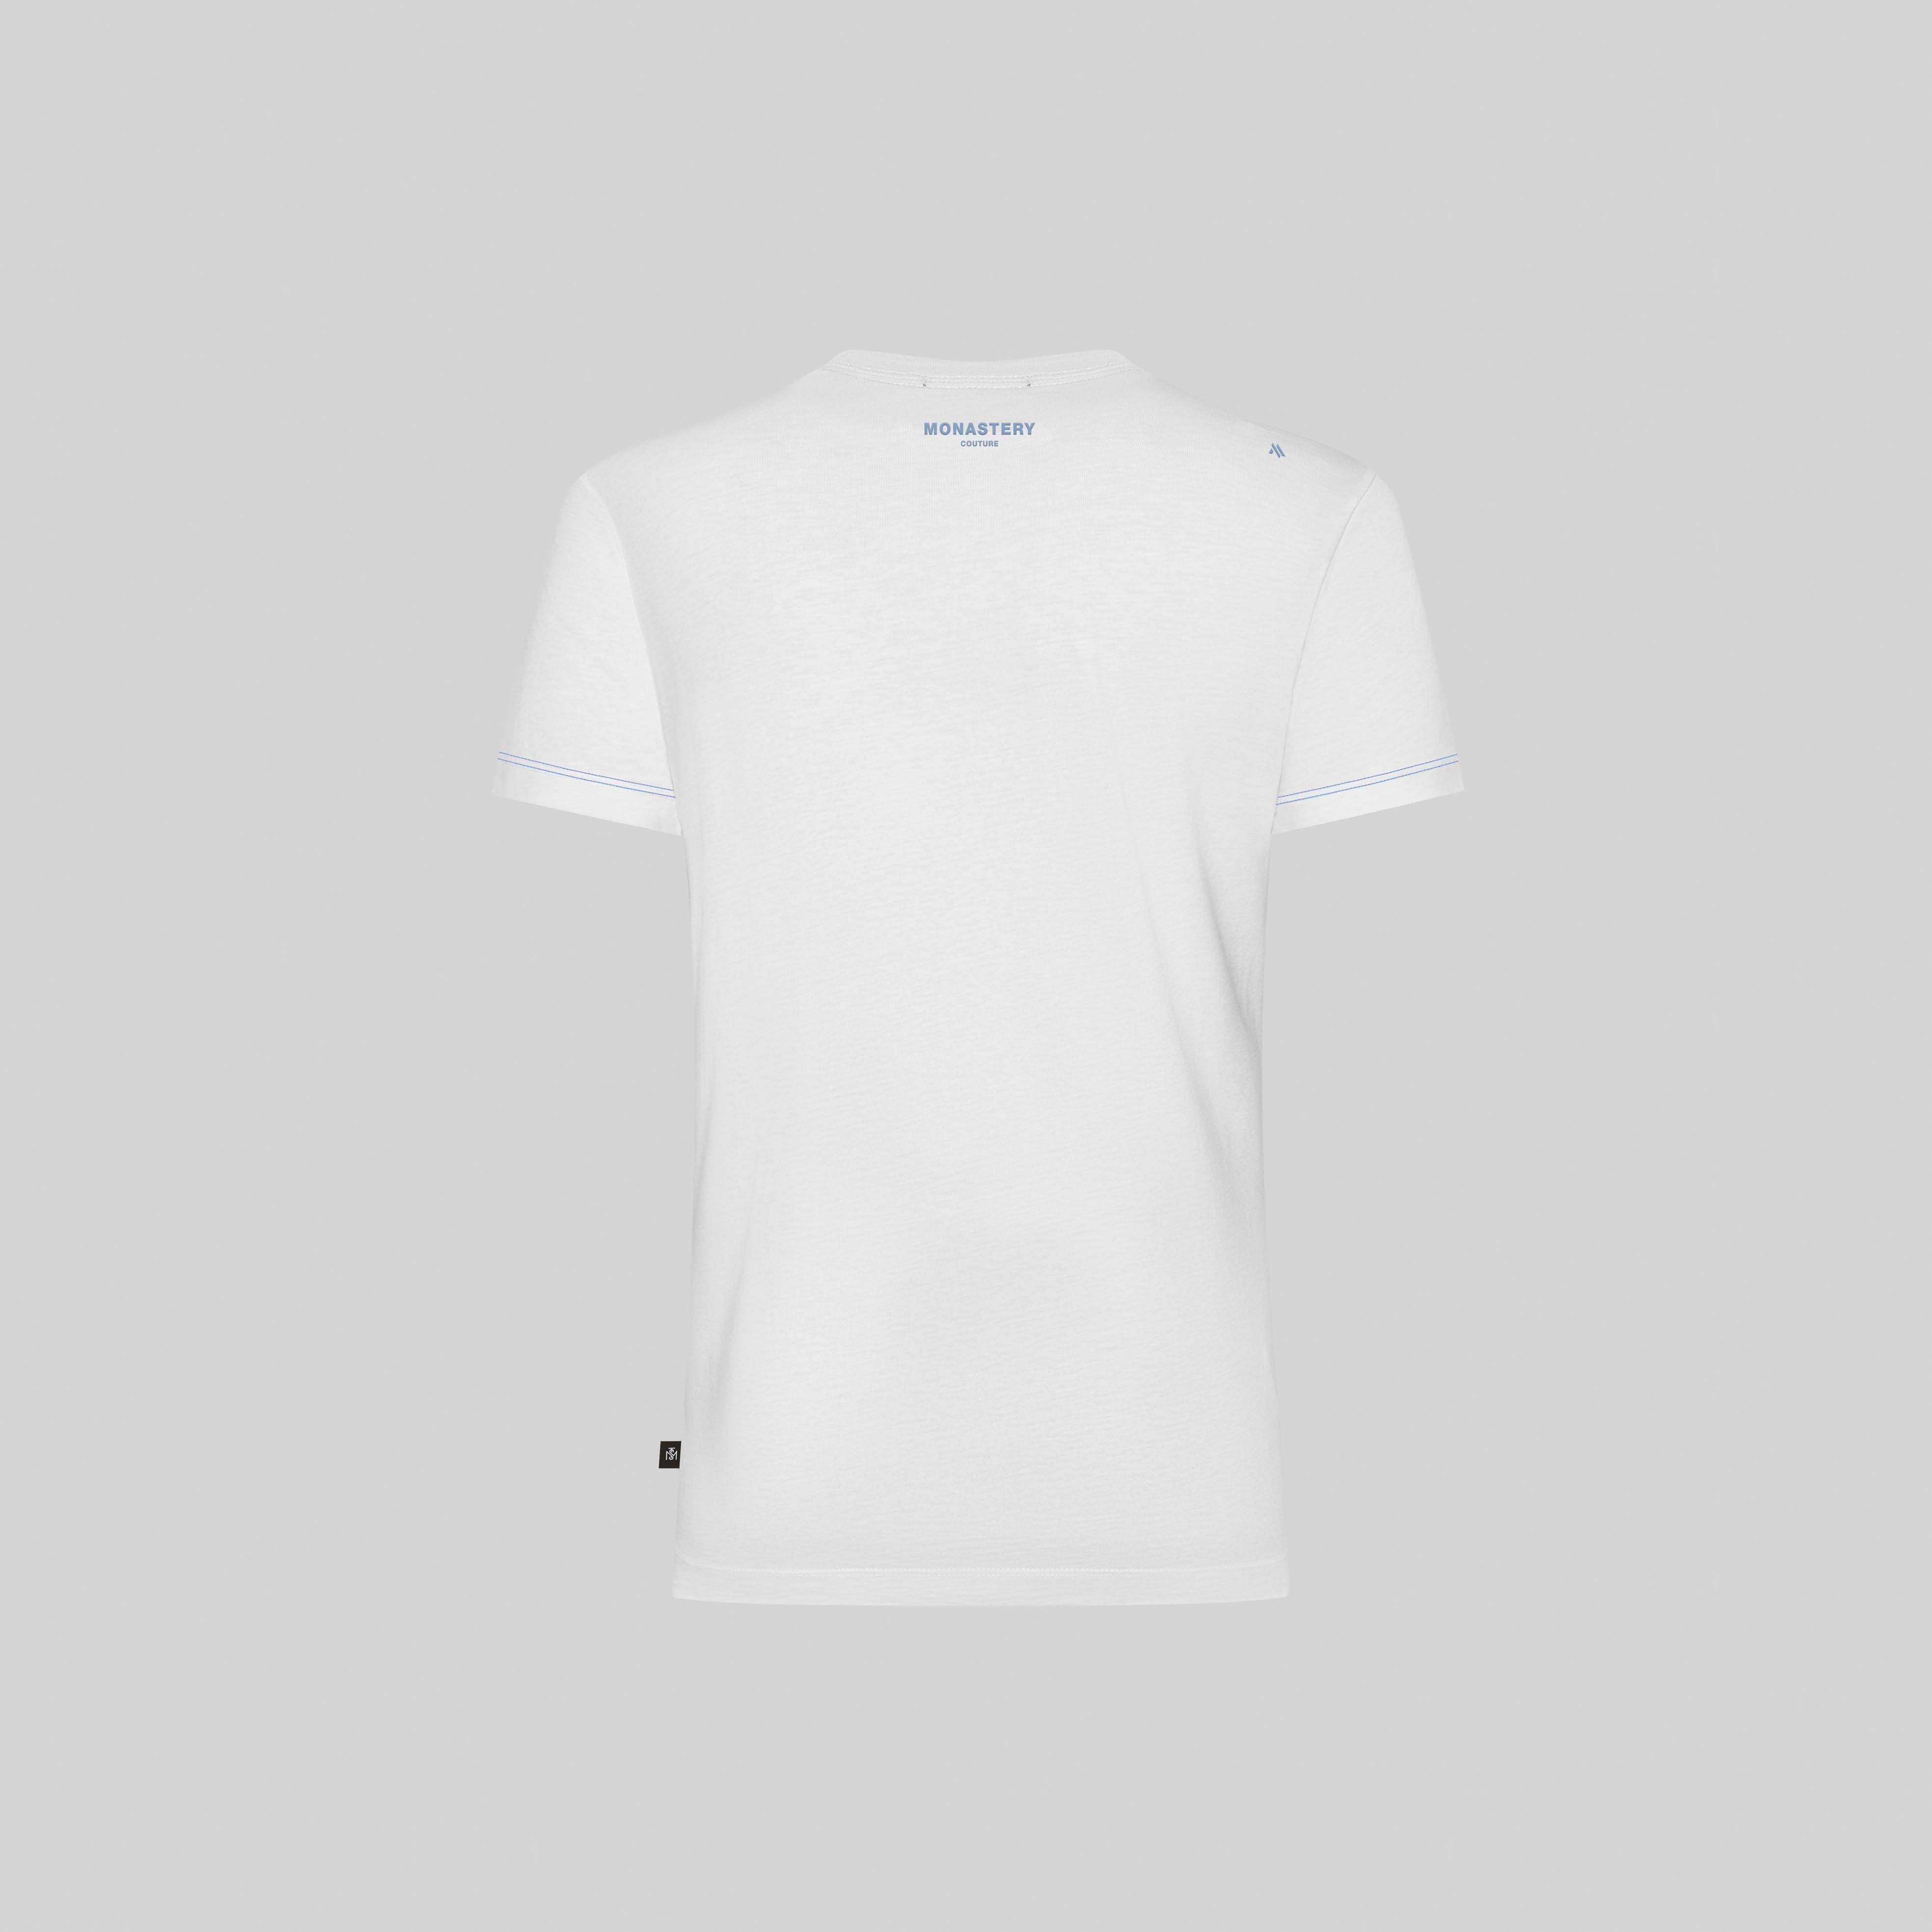 FINLE WHITE T-SHIRT | Monastery Couture